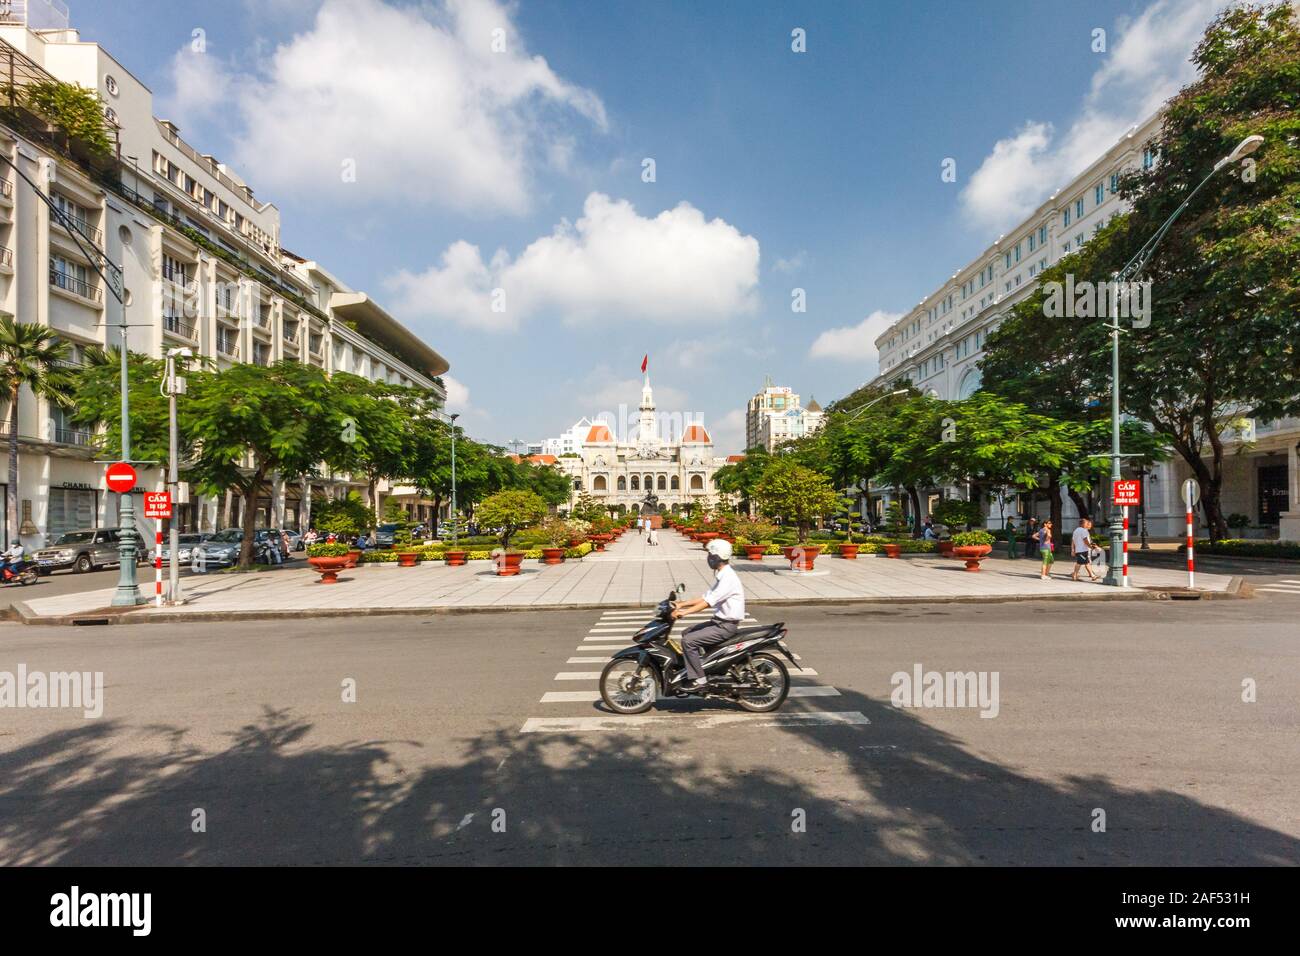 Ho Chi Minh City, Vietnam - October 30th 2013: A motorcyclist rides along the road. In the background is the Peoples Committee Building. Stock Photo